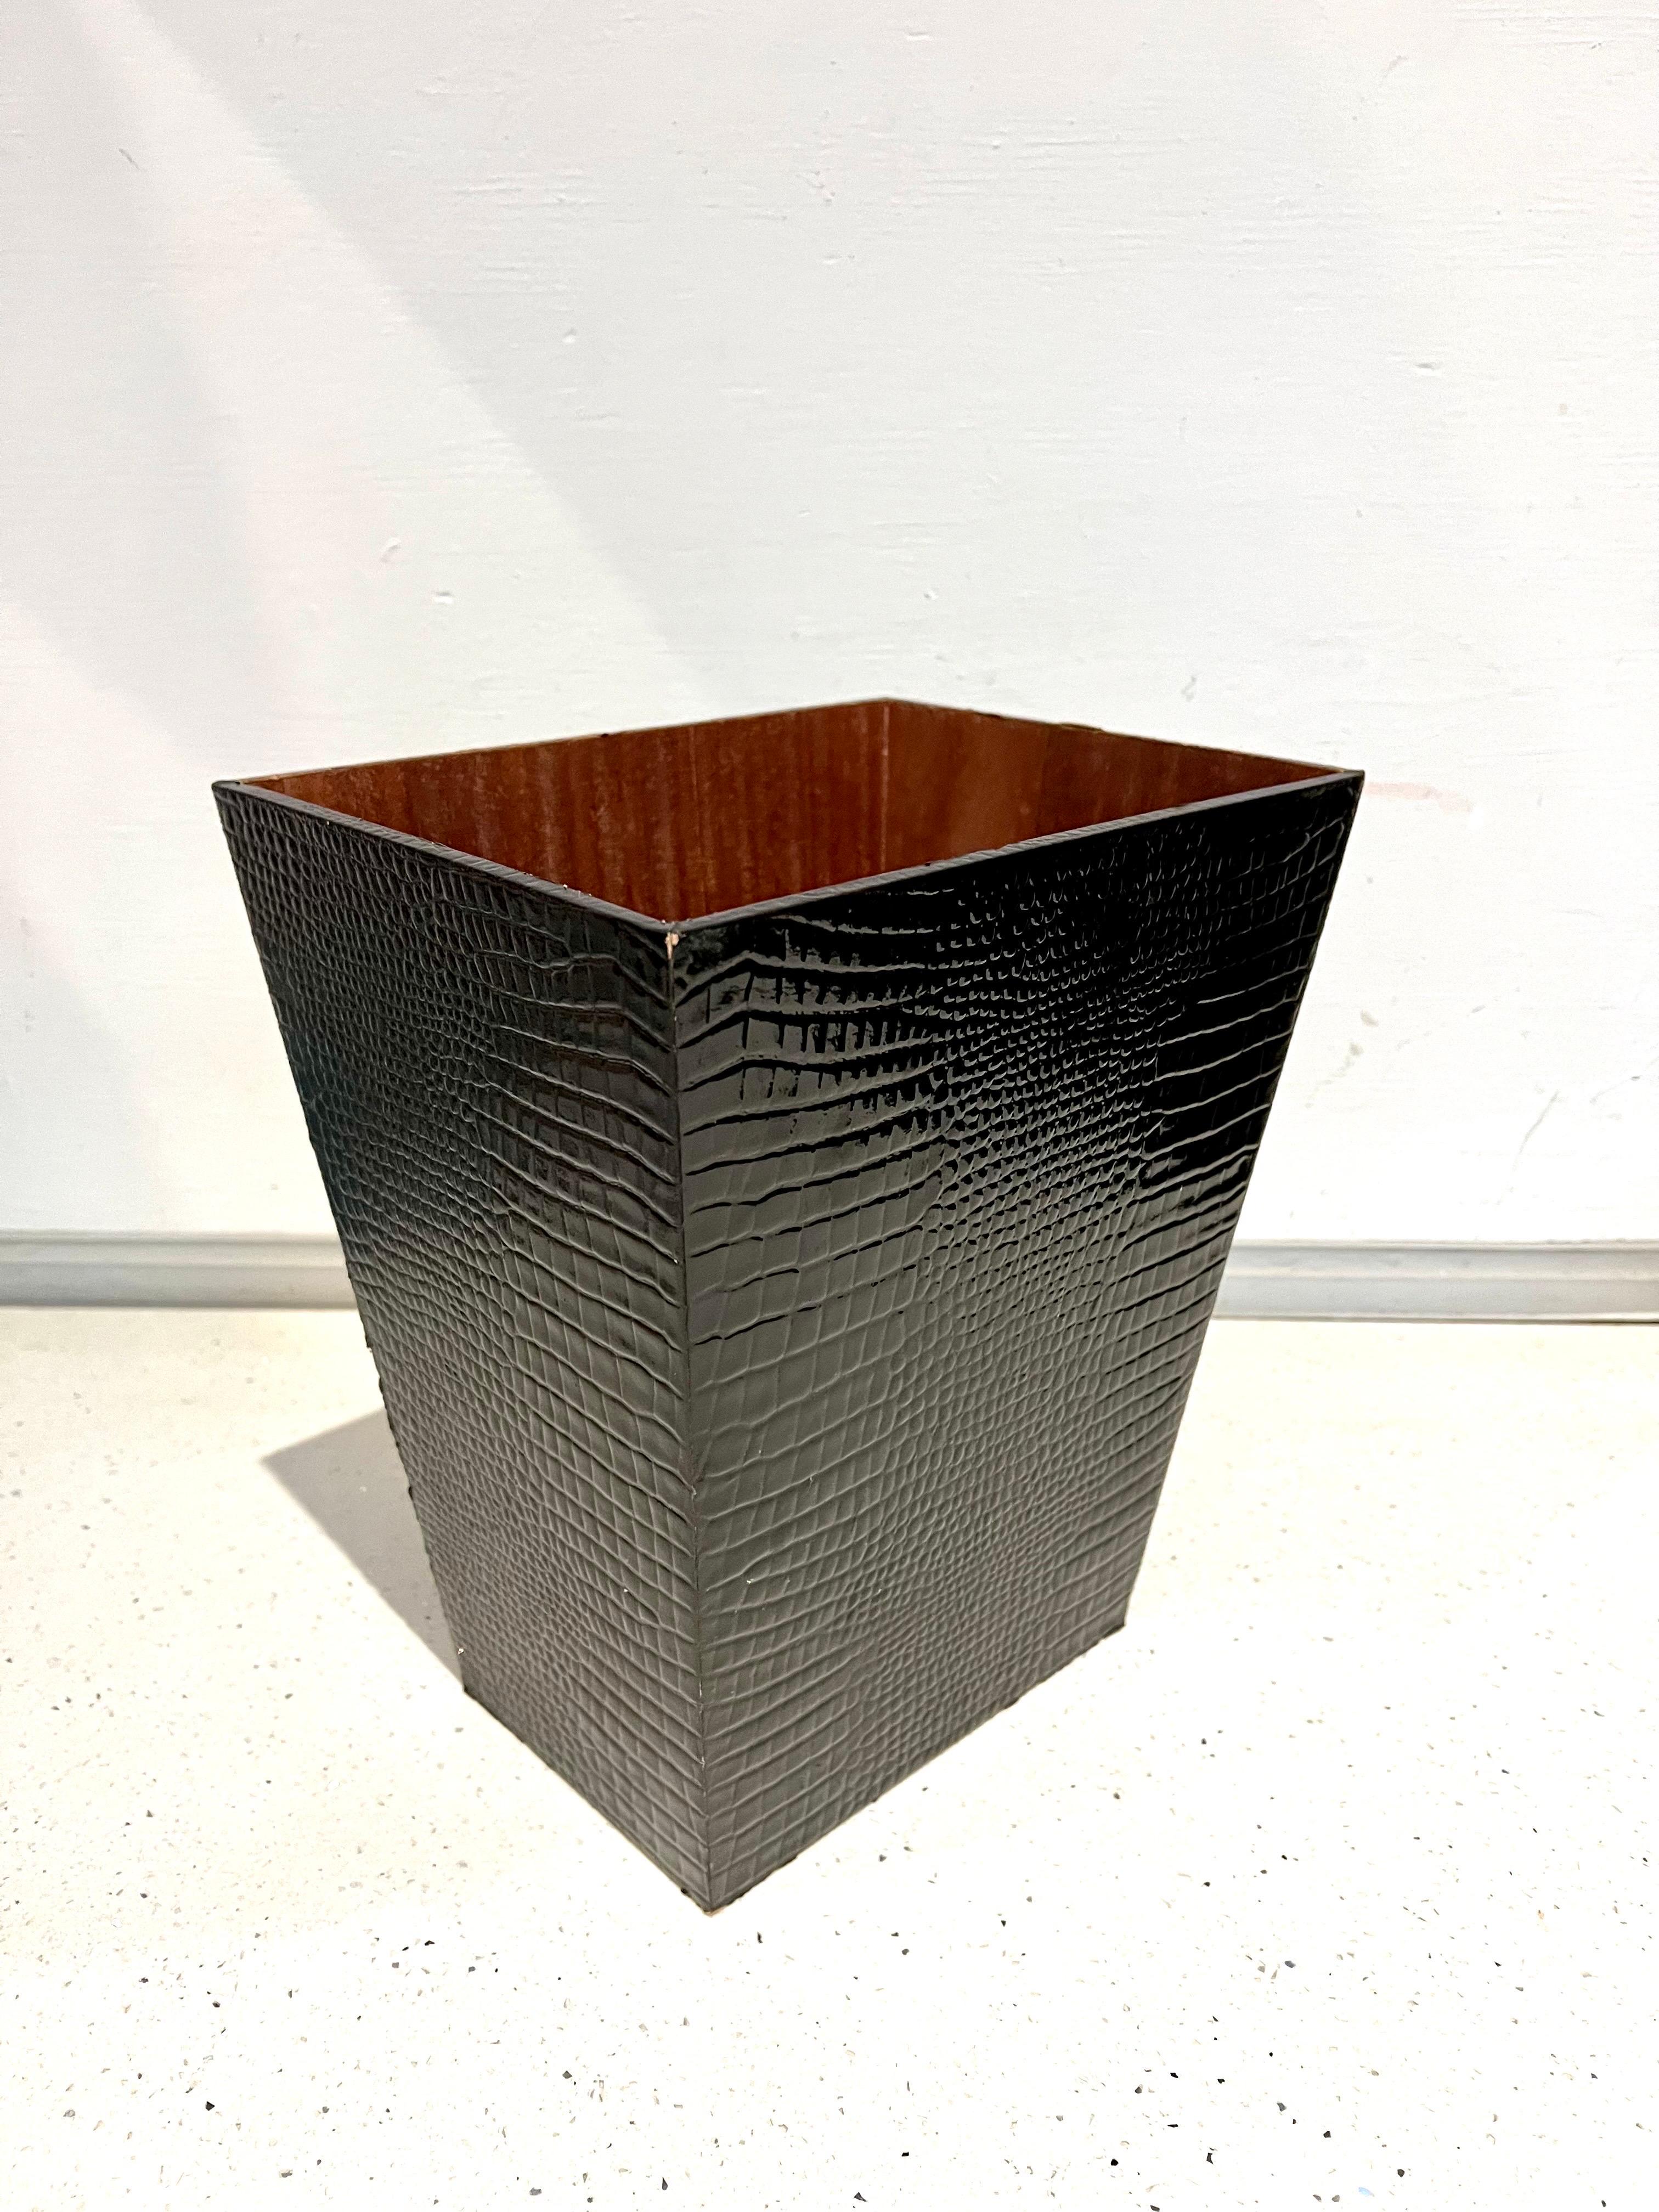 Elegant Cocodrile faux leather wastebasket by Labrazel, circa 1980's with solid mahogany construction wrapped with faux leather, made in Italy.